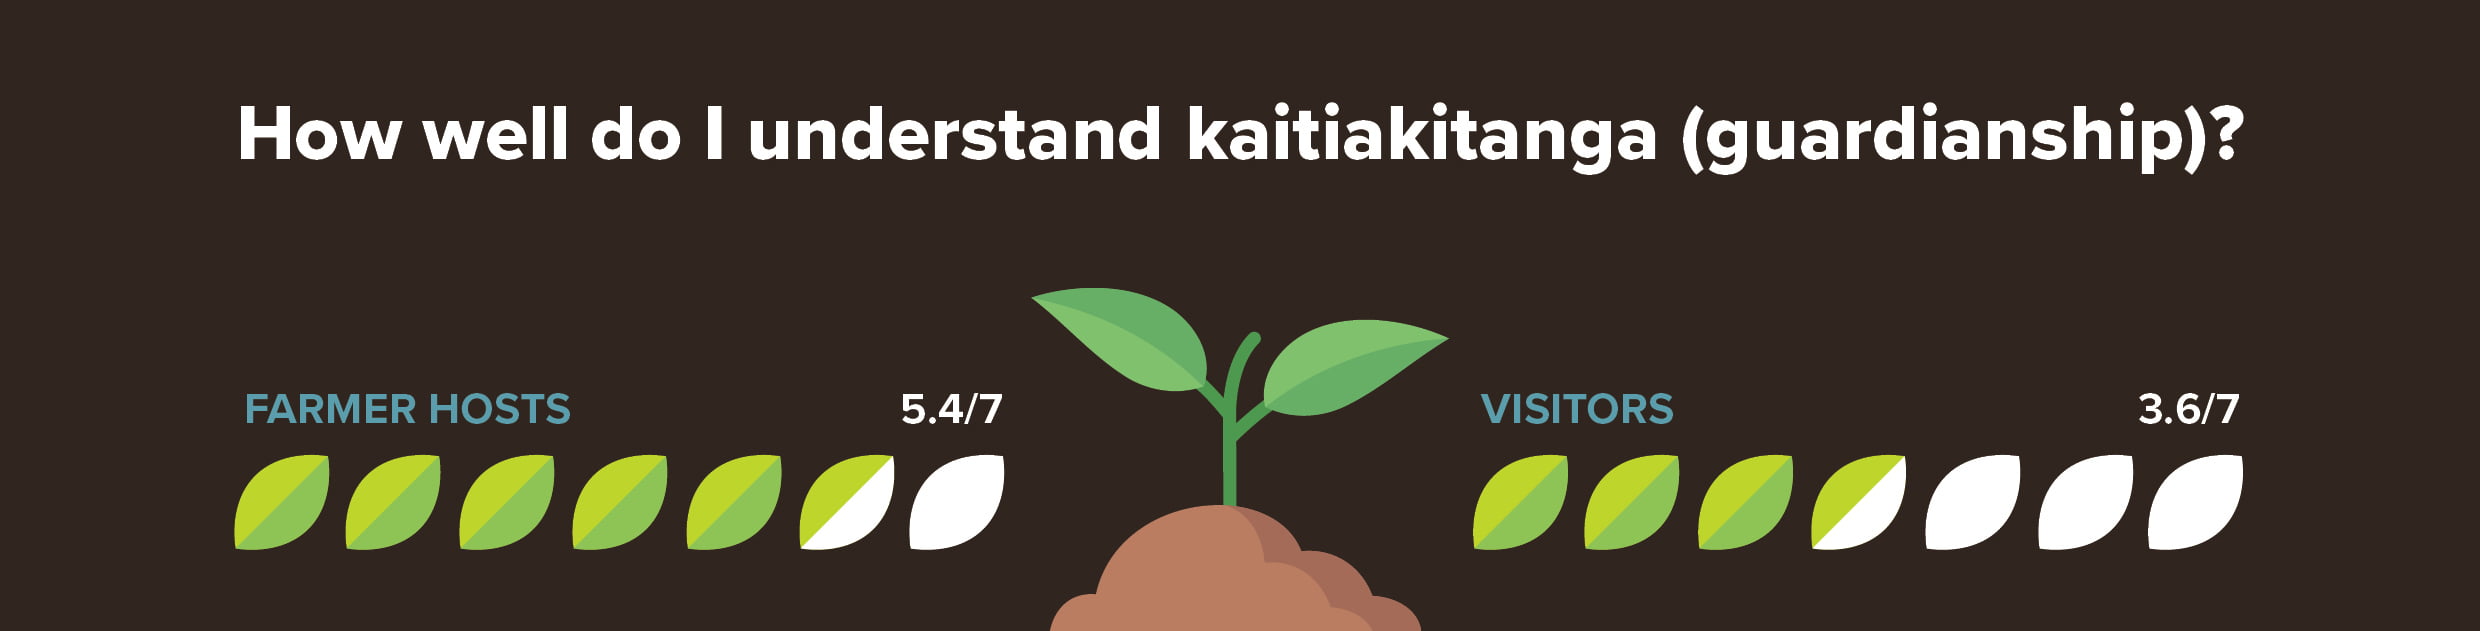 There was disparity in self-ratings in understanding of kaitiakitanga – 5.4/7 for farmer hosts and 3.6/7 for visitors